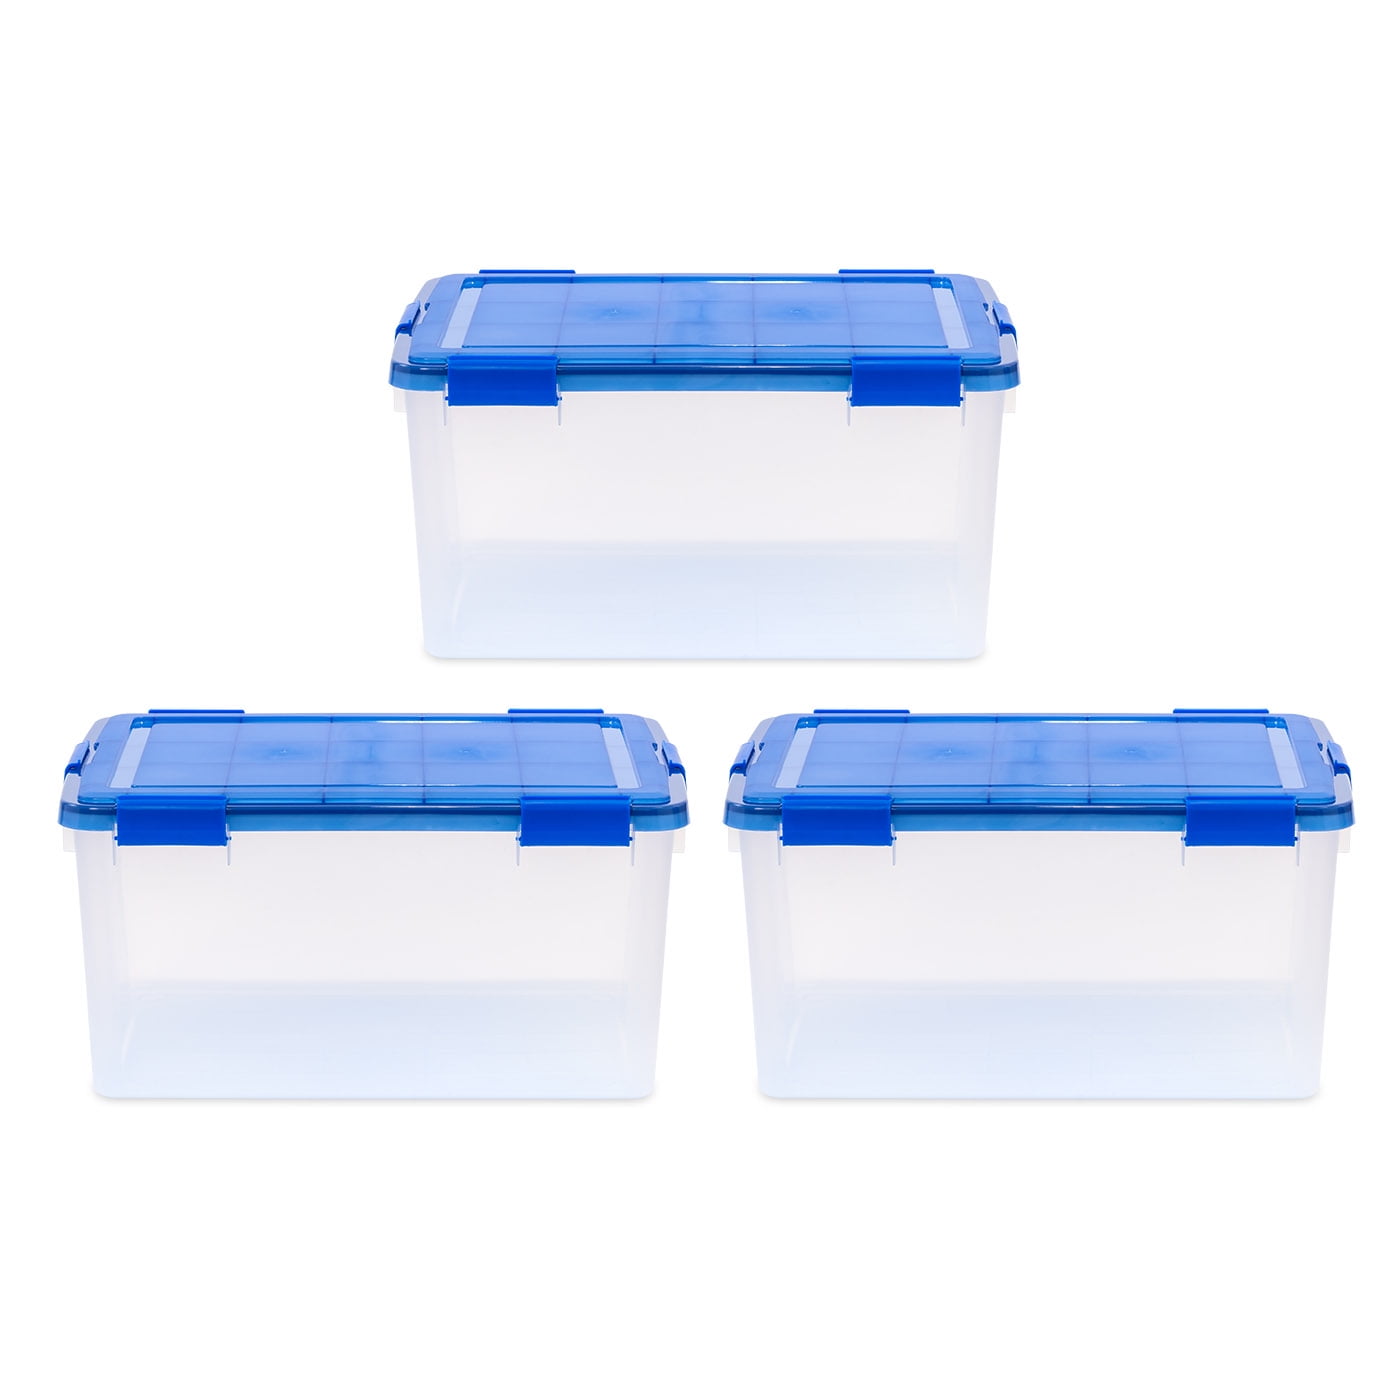 Greenware® On-The-Go 4-Cell Carryout Container - 6L x 6W x 2 1/2H